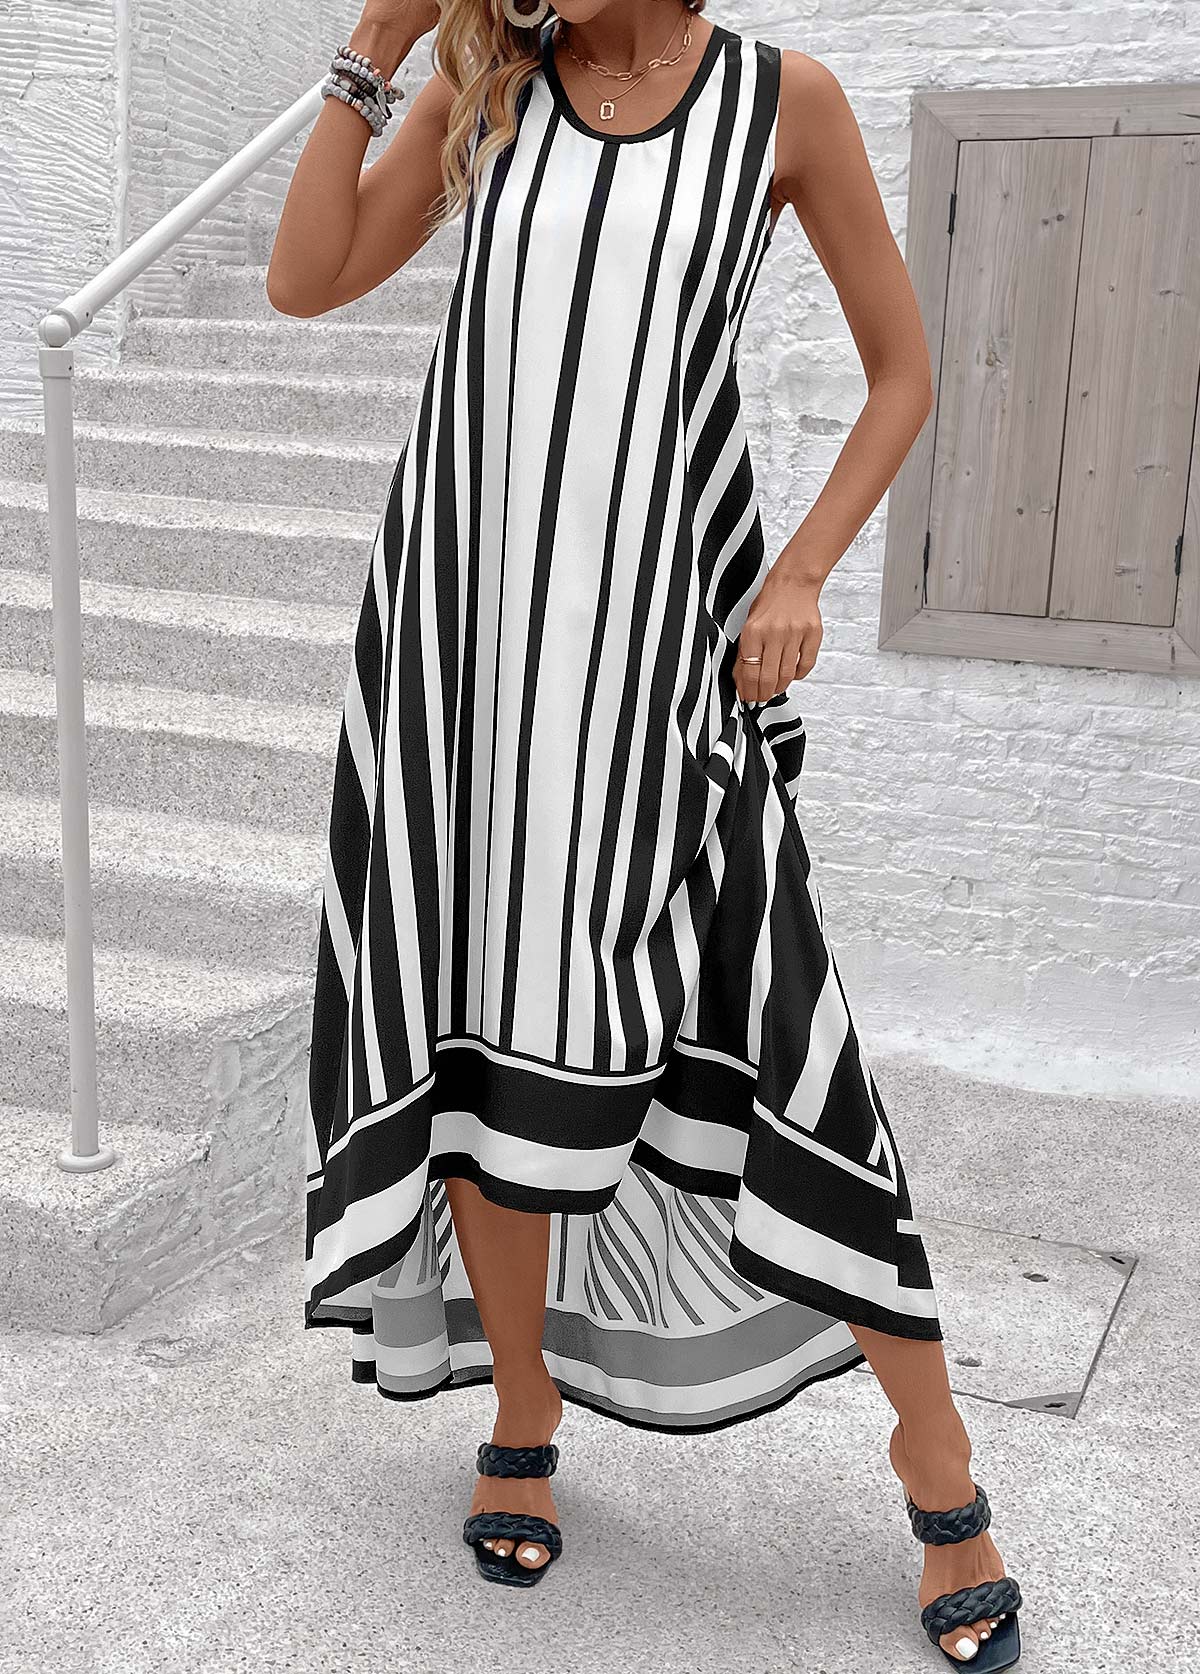 Black Breathable Striped High Low A Line Sleeveless Dress